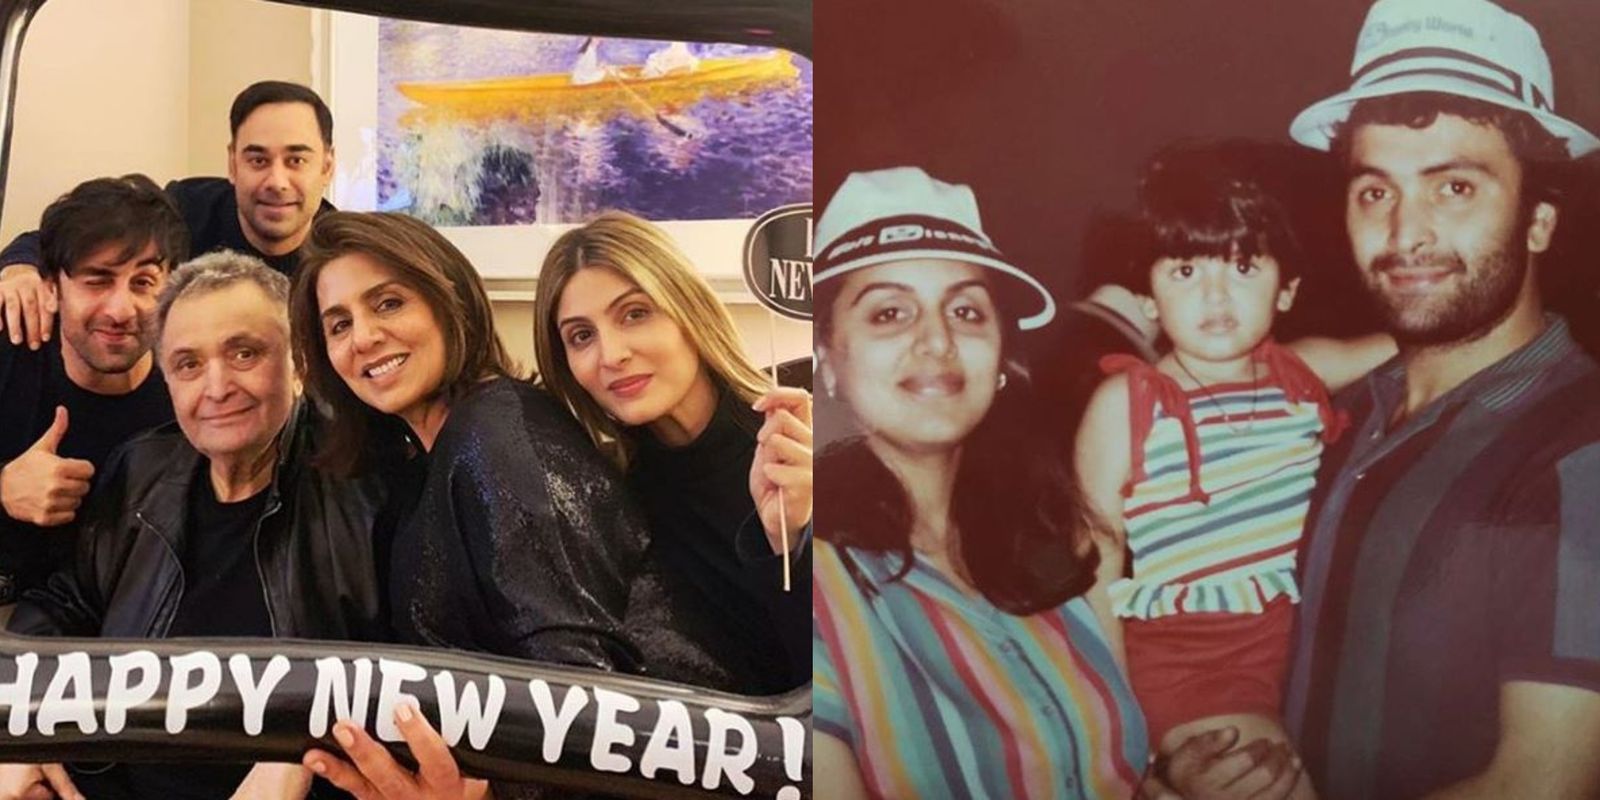 Riddhima Pens A Heartfelt Note On Rishi Kapoor's Birthday, Writes 'Celebrating You Today And Always'